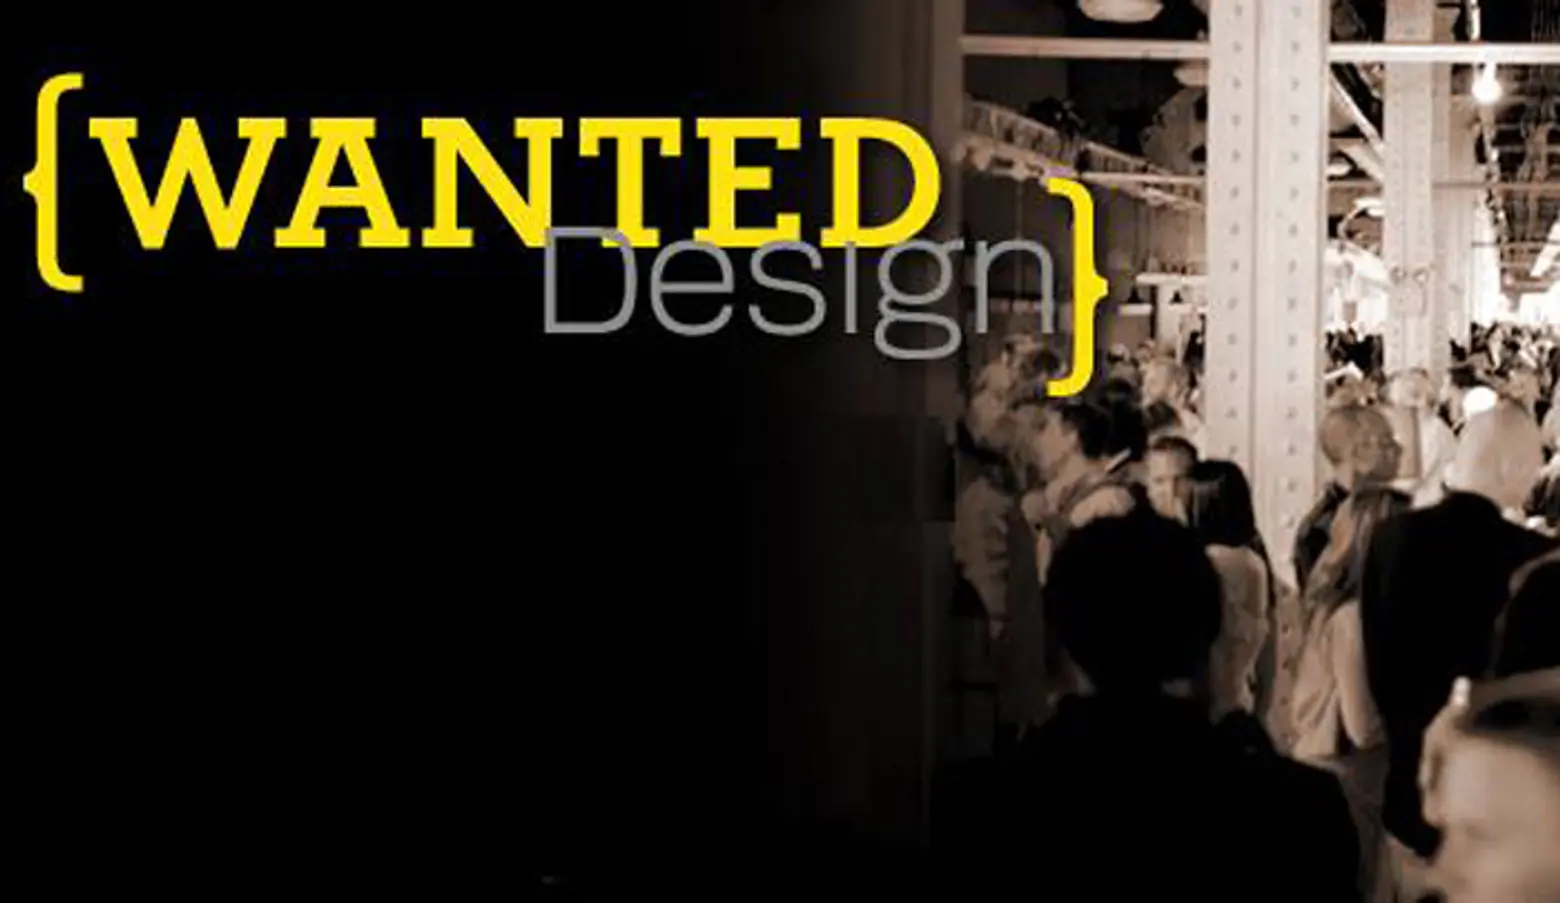 WantedDesign The Tunnel, 269 11th Avenue, May 16-19. The satellite design fair enlivens the former mega night club this weekend, bringing a roster of designers, manufacturers and conversations to Chelsea. Grab tickets to the opening party on Friday to meet other design enthusiasts. 